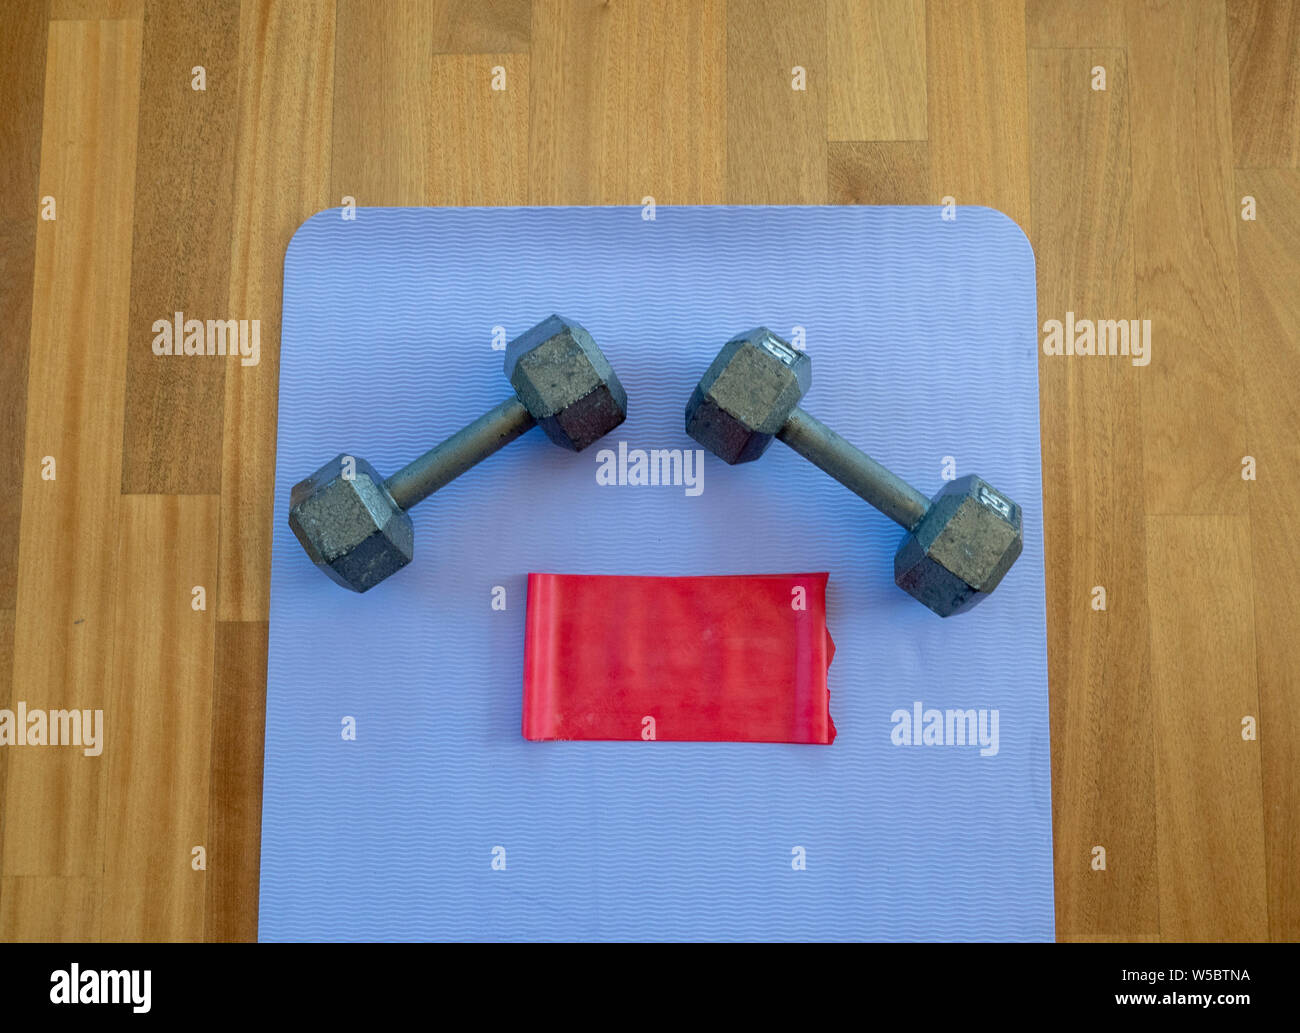 Dumbbells and Exercise band on a Yoga Mat for a Home workout Stock Photo